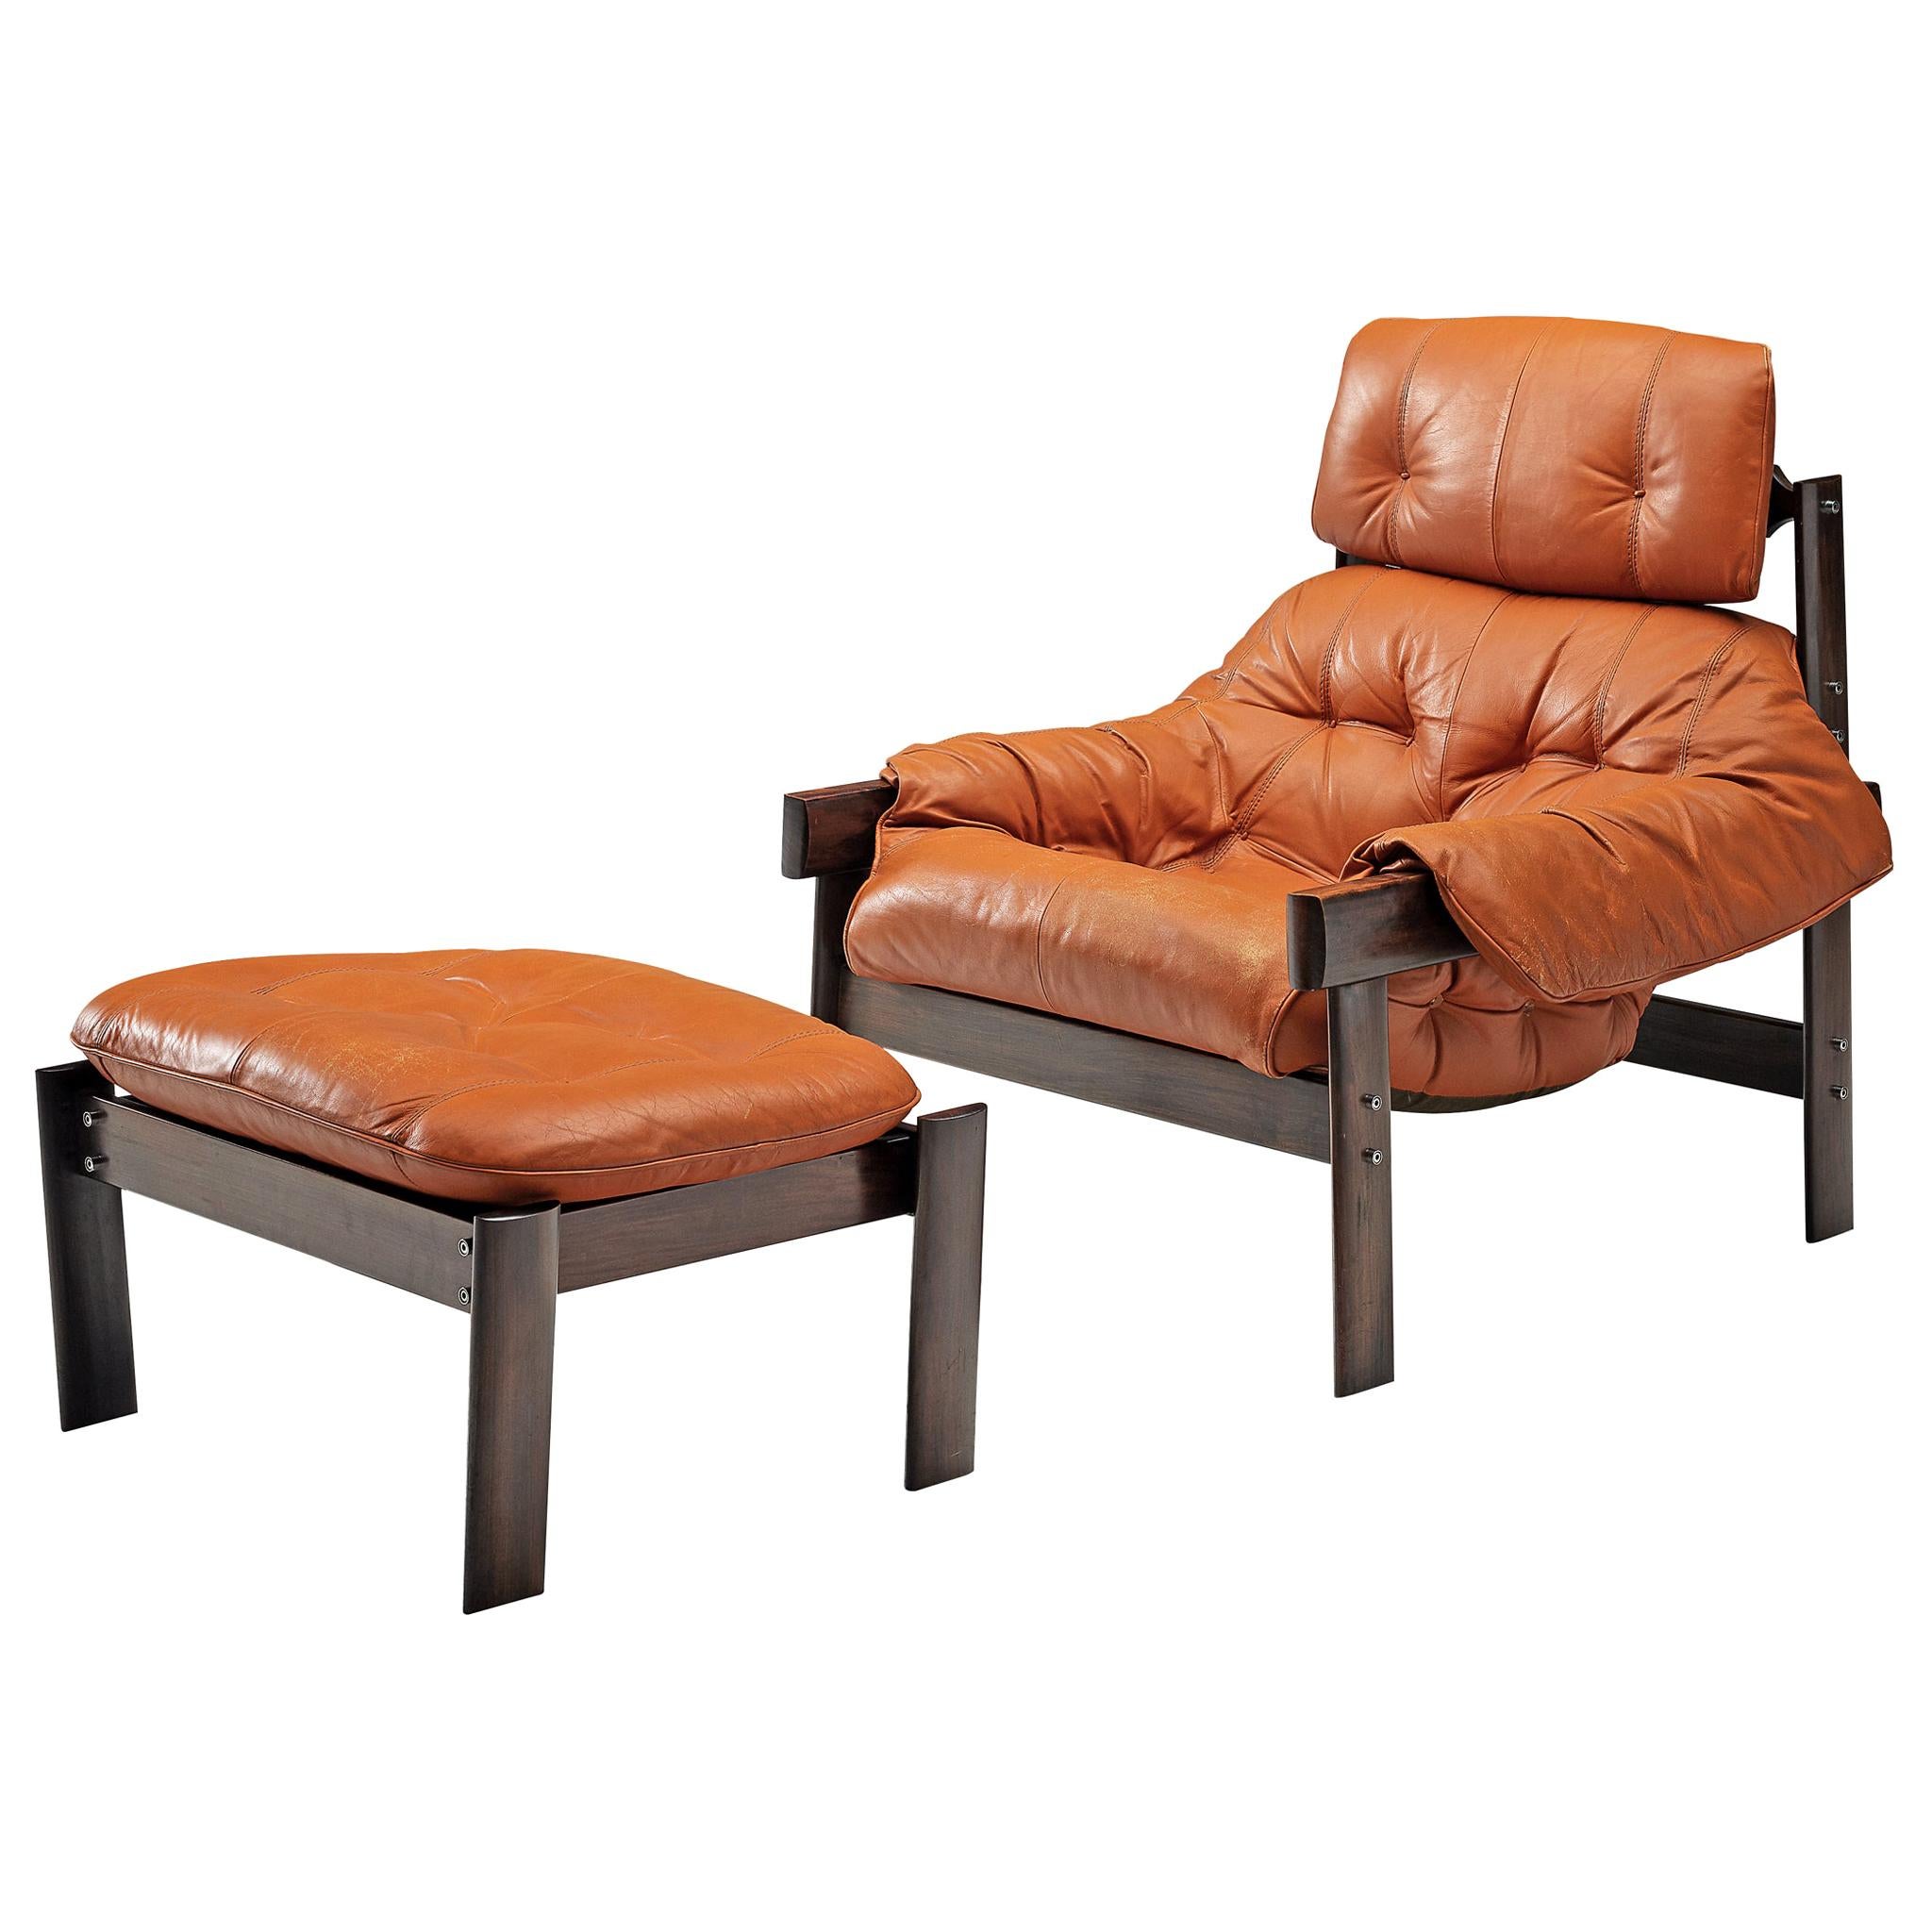 Percival Lafer Lounge Chair with Ottoman in Dark Stained Wood and Leather